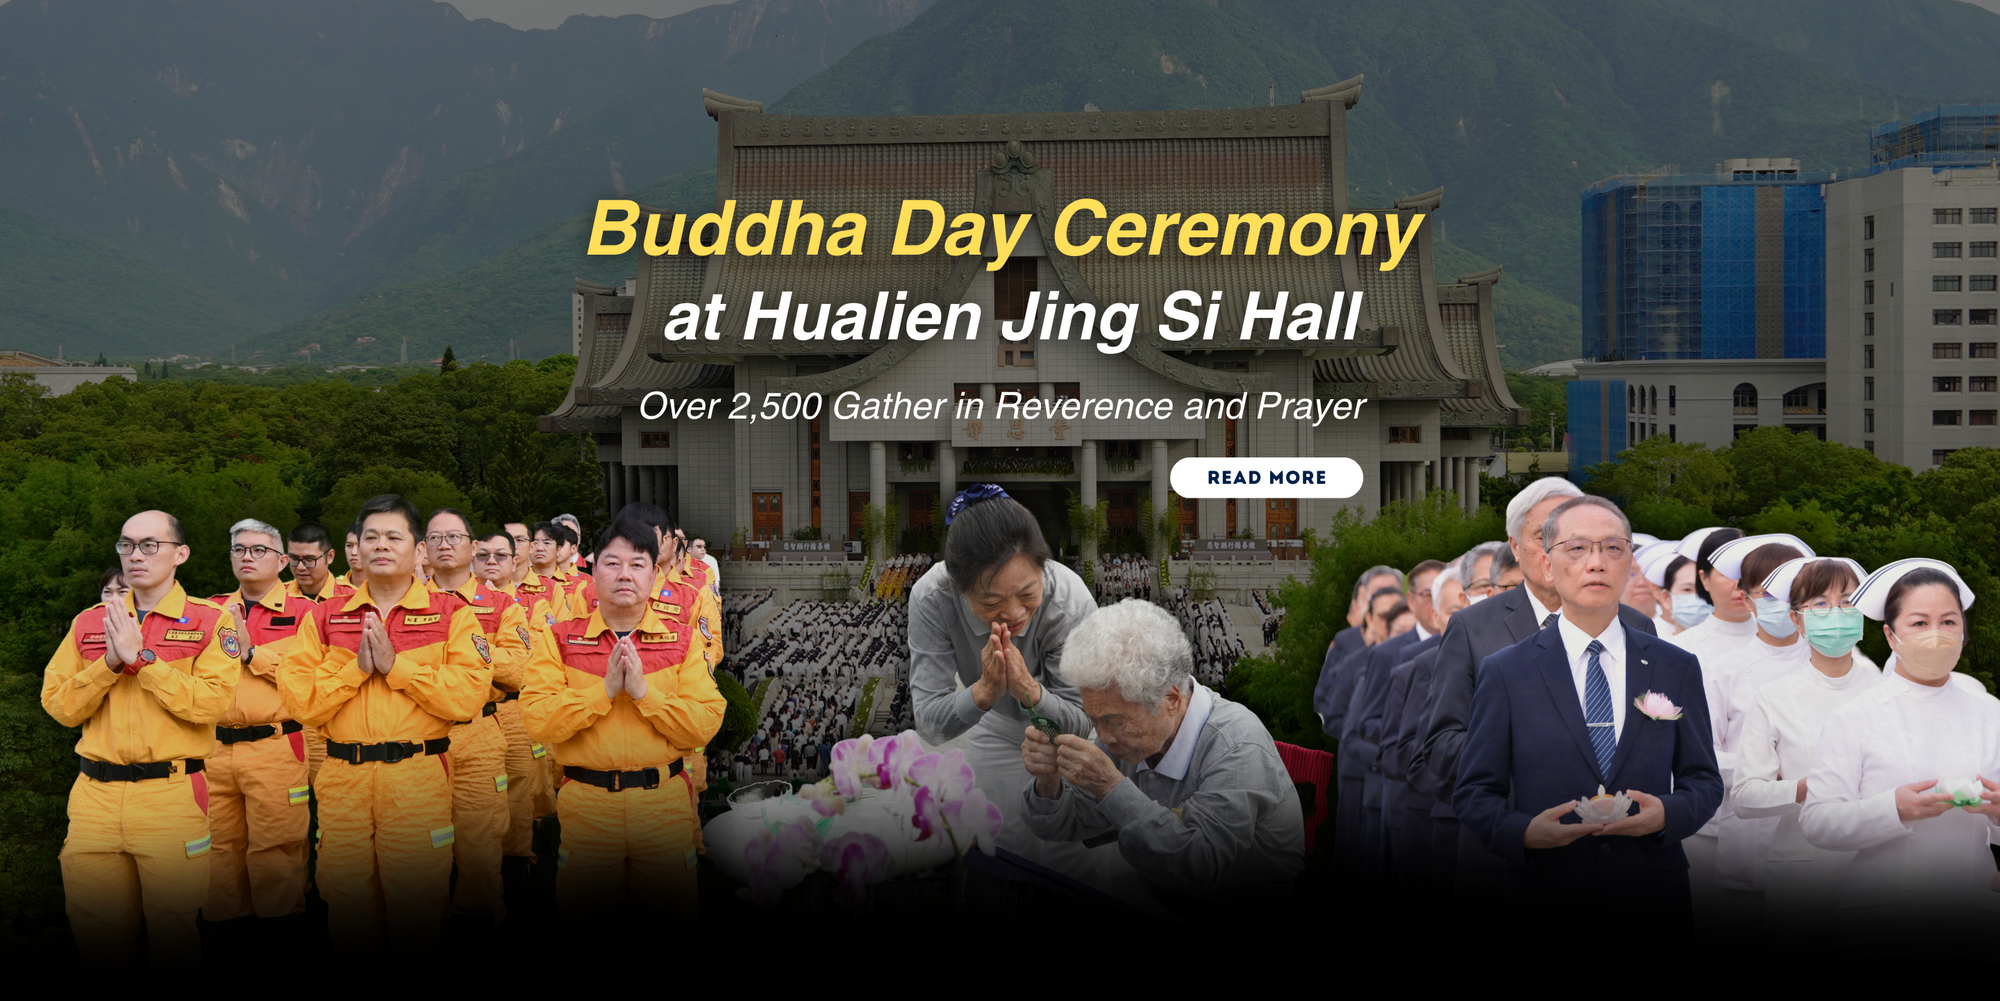 Buddha Day Ceremony at Hualien Jing Si Hall: Over 2,500 Gather in Reverence and Prayer